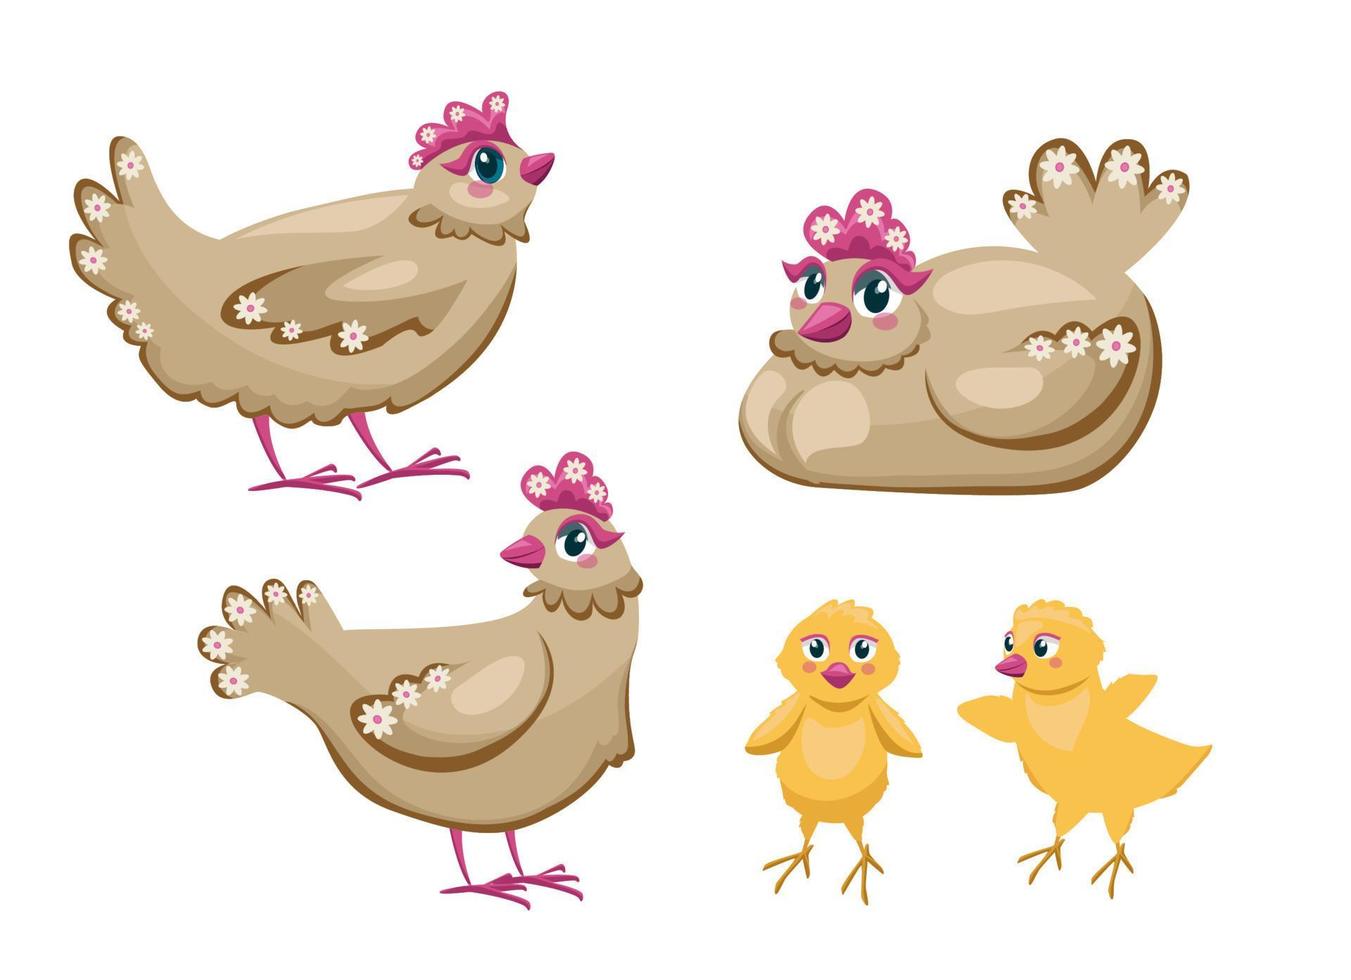 Cute cartoon chickens set. Little chicks. Farm birds and animals collection. Vector illustrations in comic style.